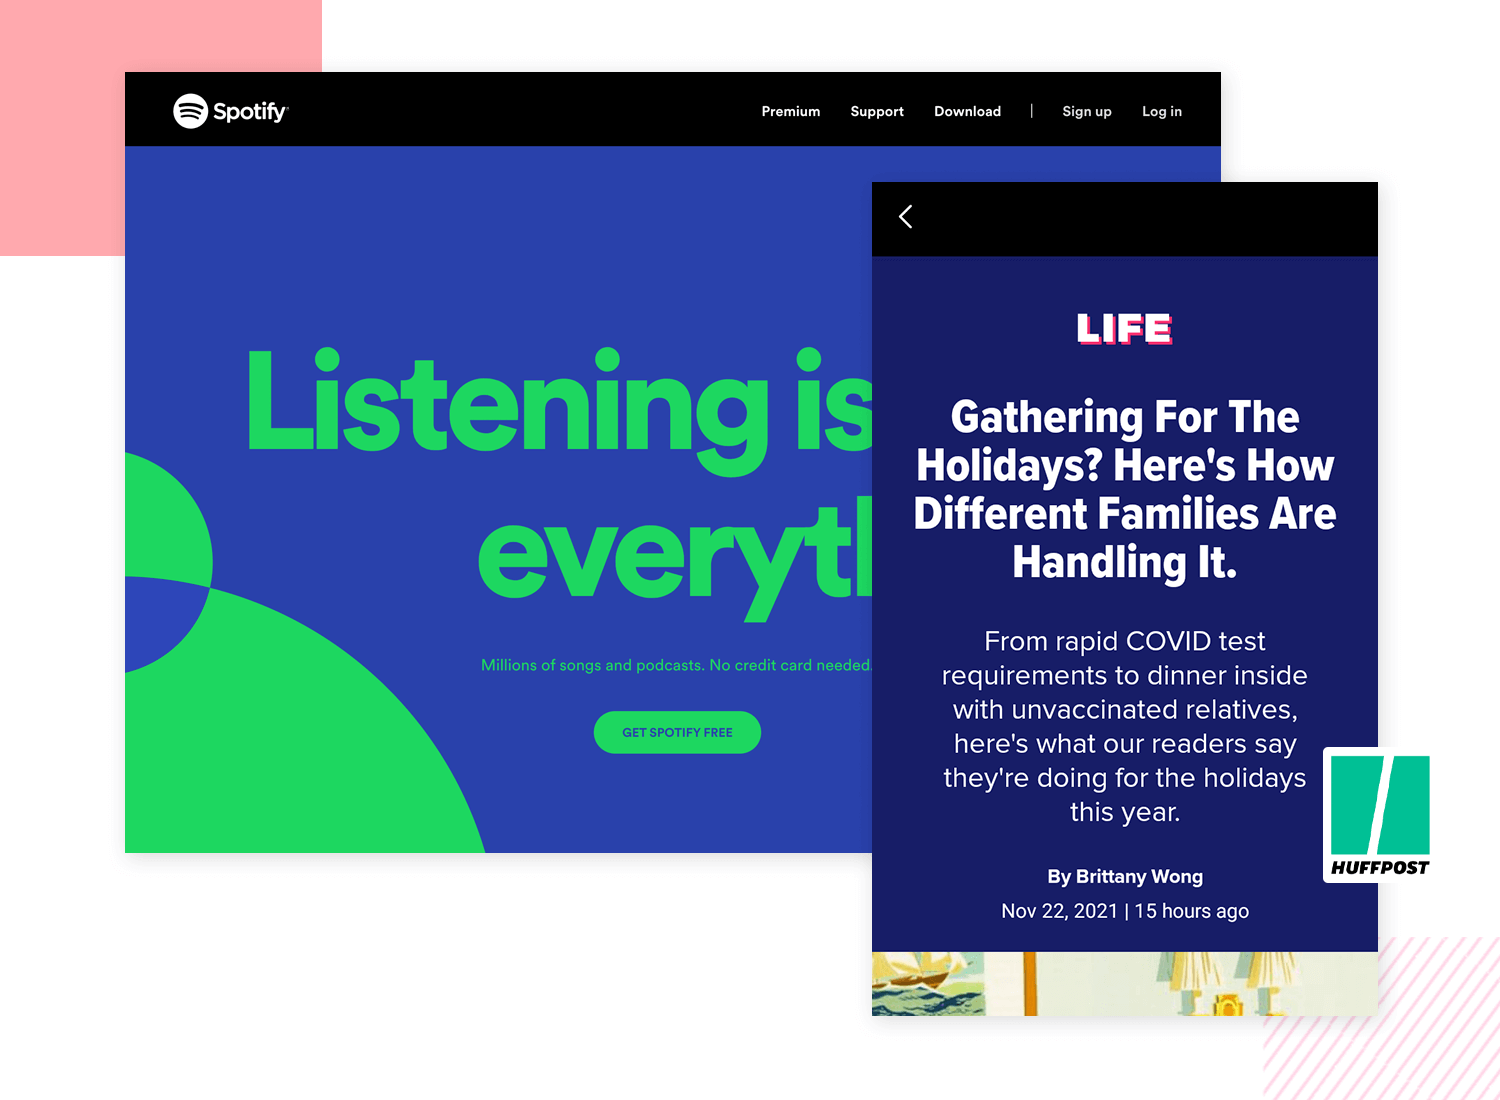 Proxima Nova used in Spotify and Huffpost for readability